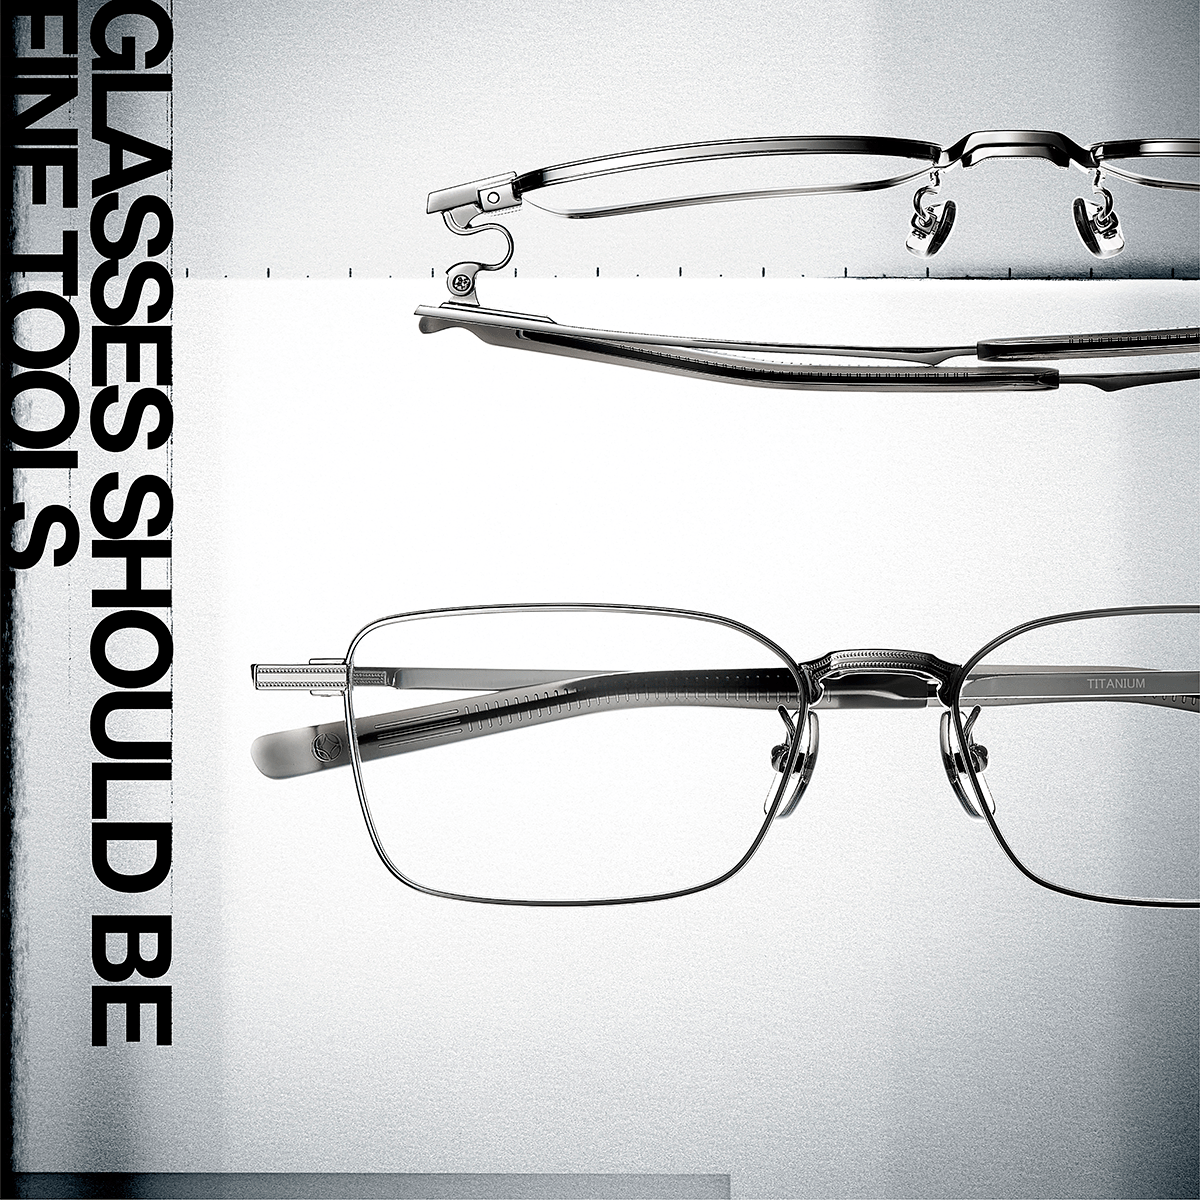 S-955T series｜NEW COLLECTION 2023 SPRING｜999.9 フォーナインズ